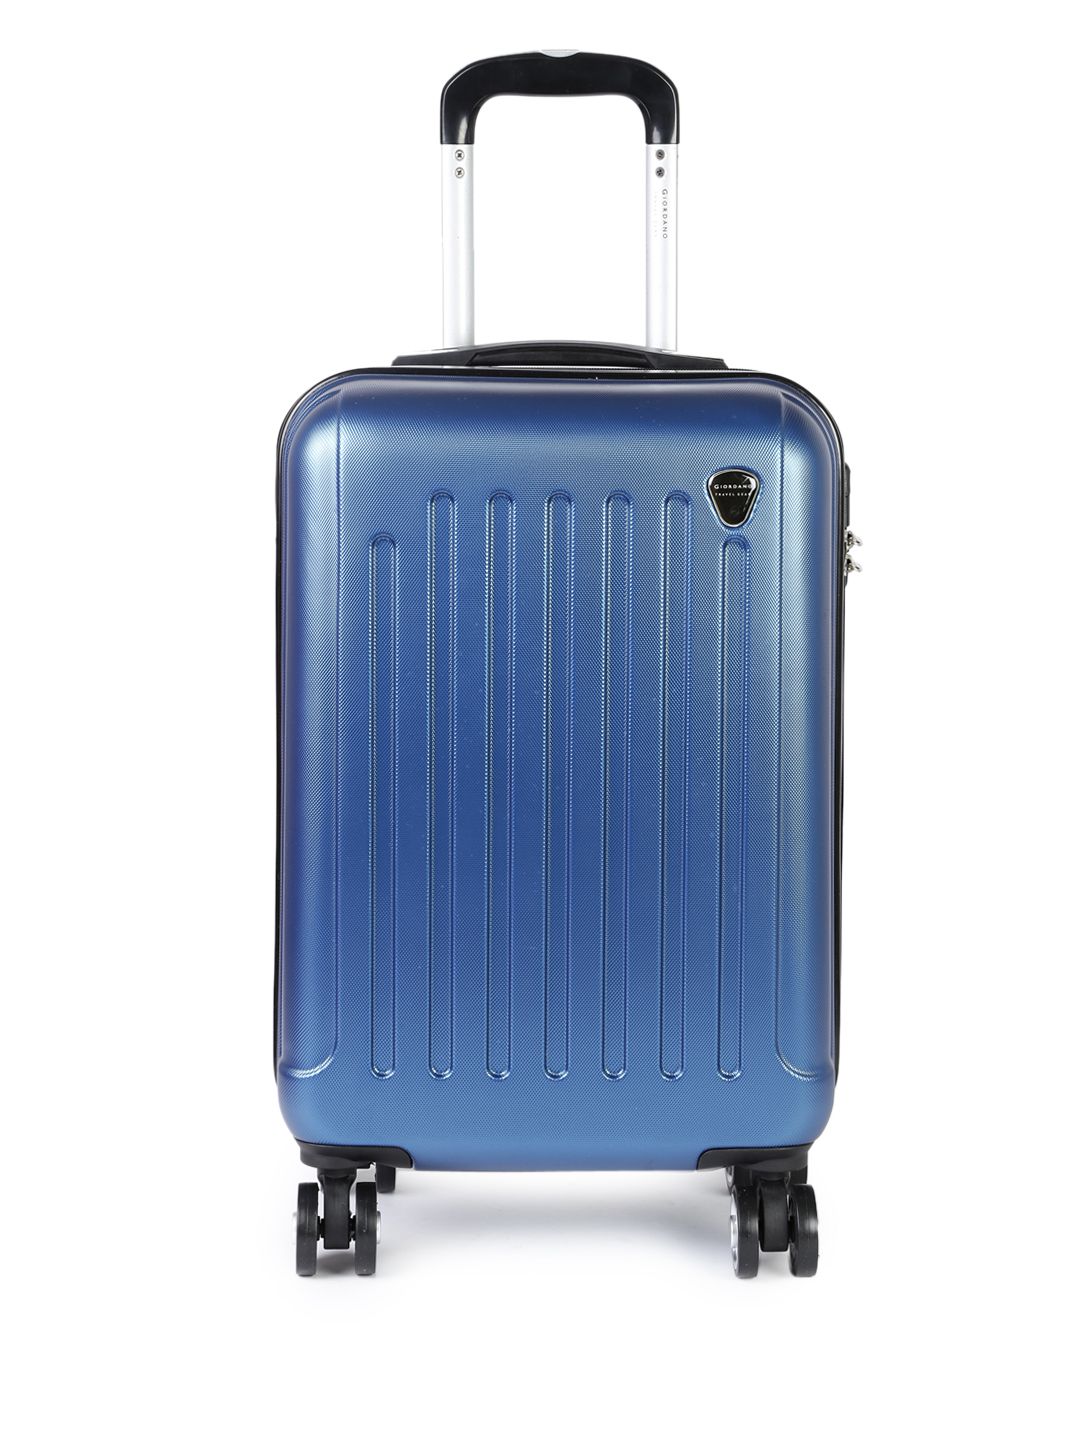 GIORDANO Blue 20 Inch Cabin Trolley Suitcase Price in India